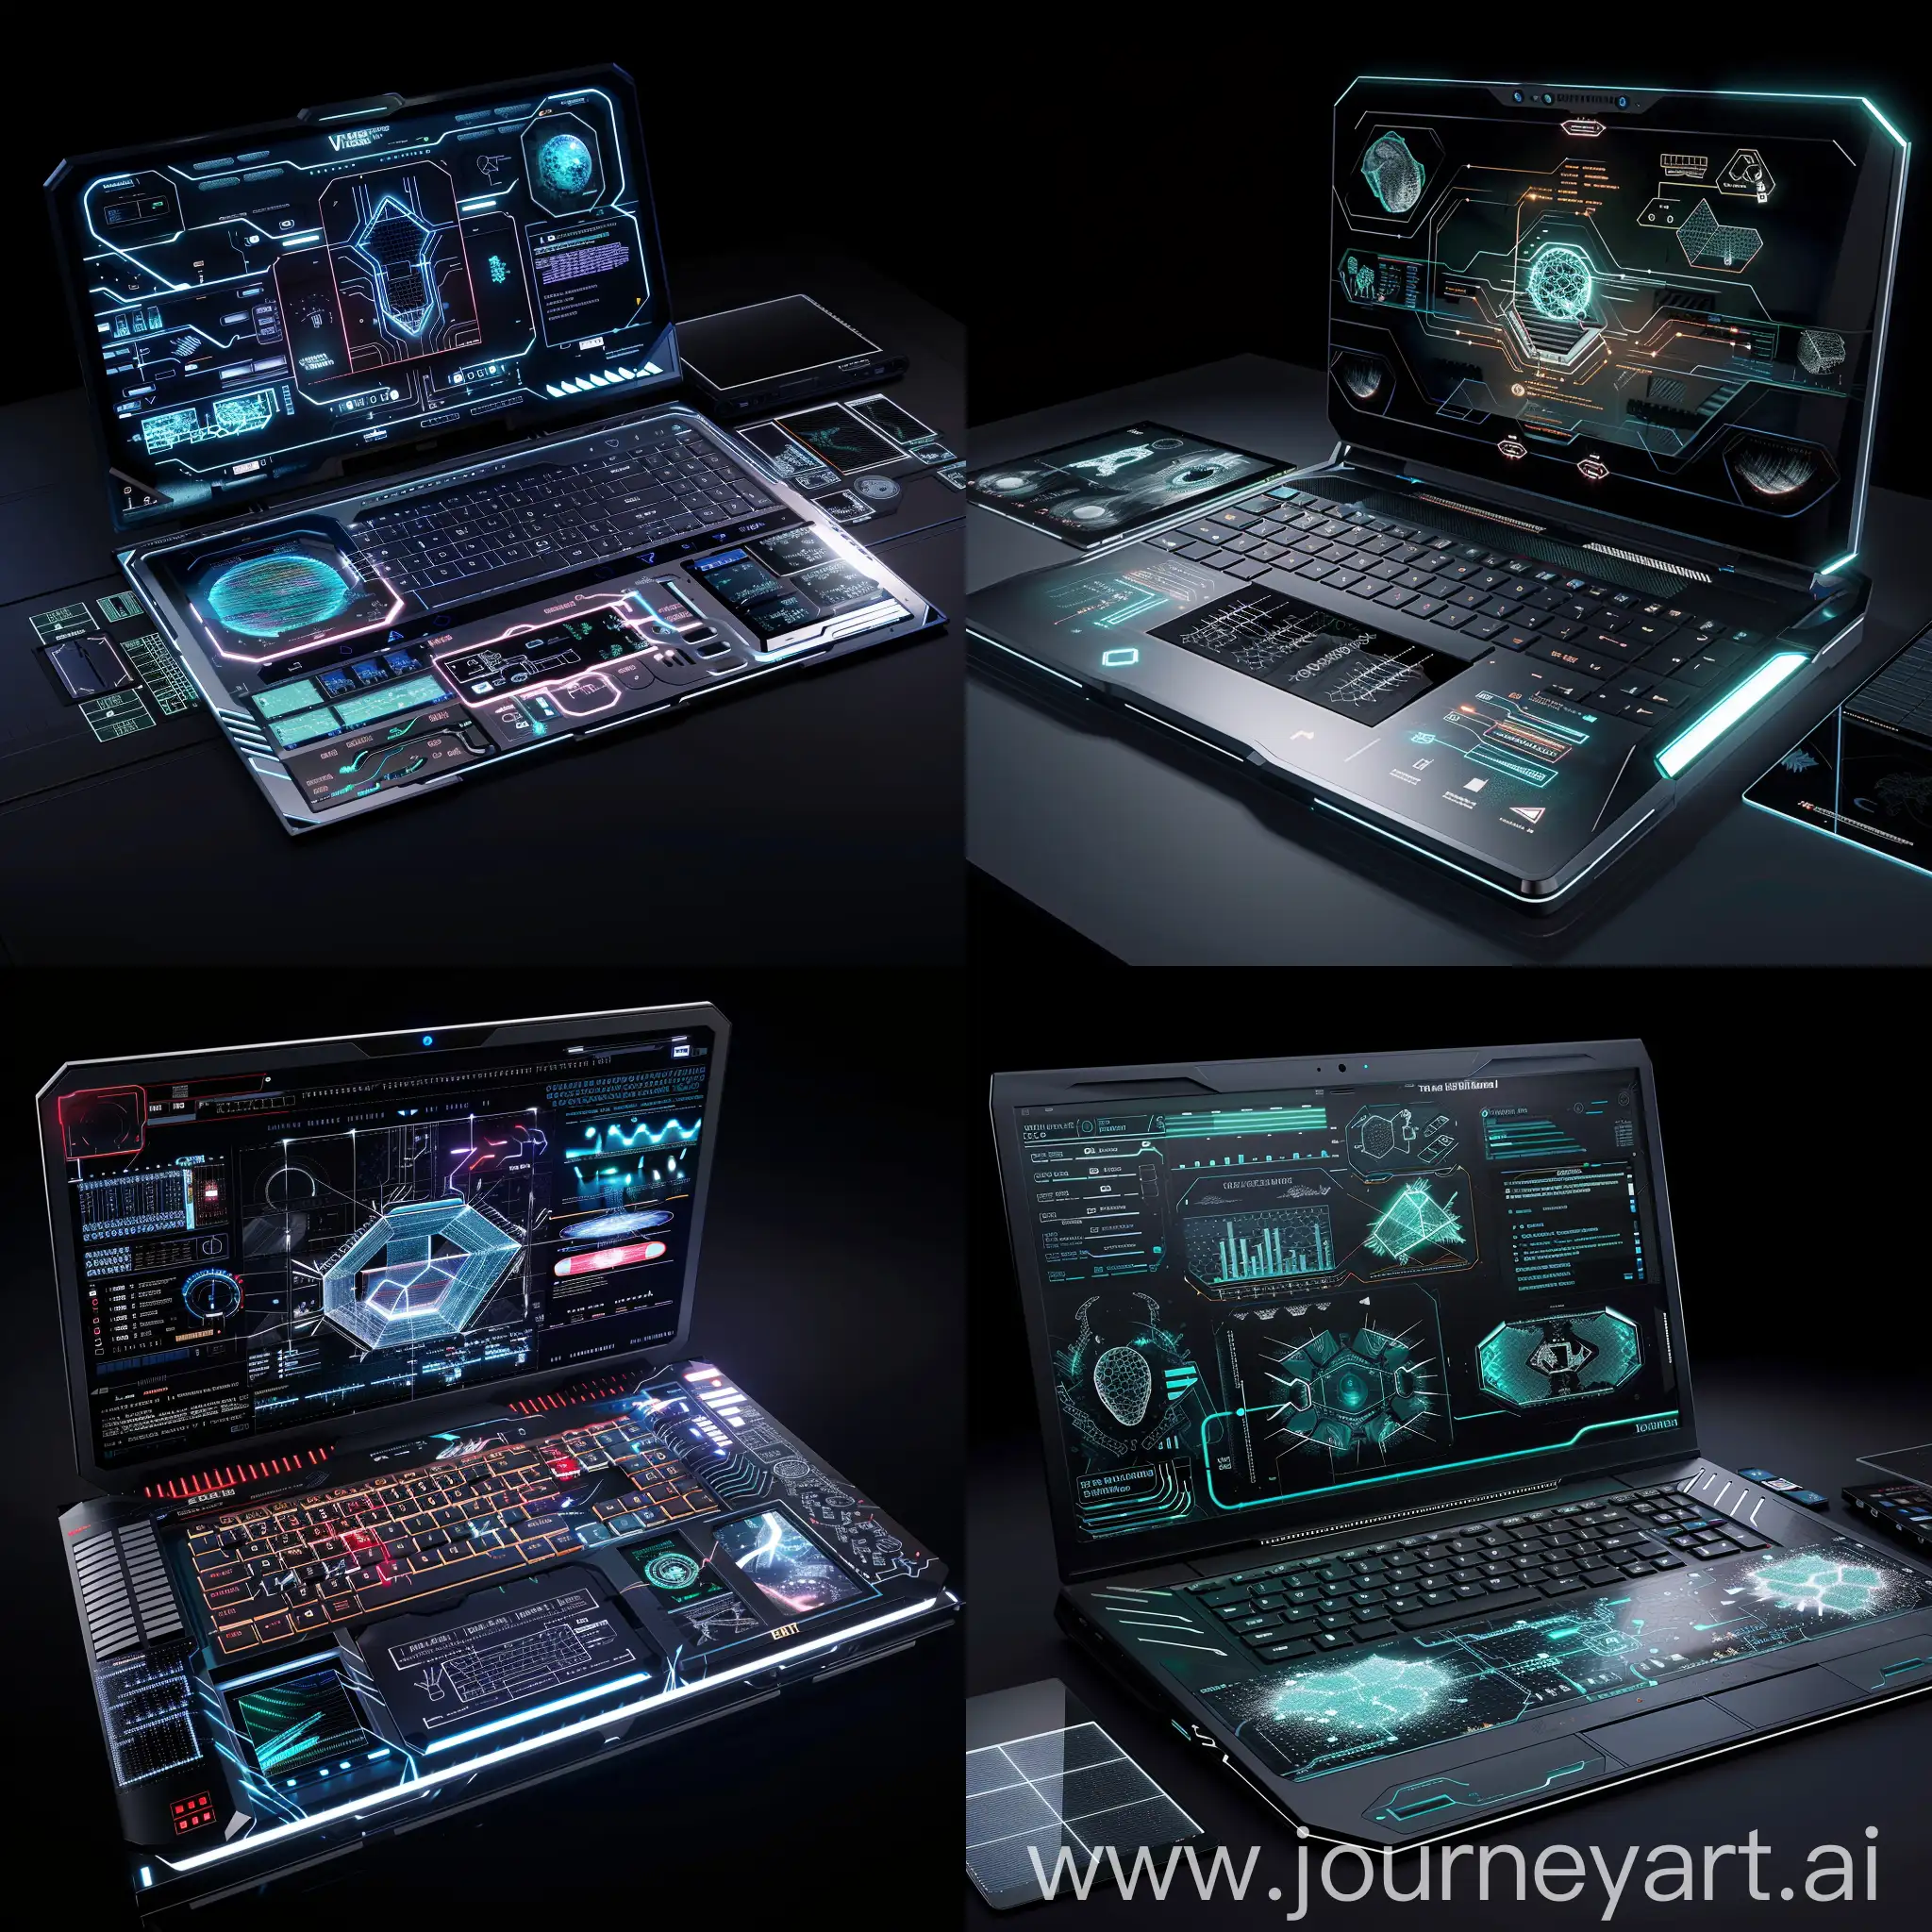 Futuristic-Laptop-with-Quantum-Computing-Processor-and-Holographic-Storage-Drives